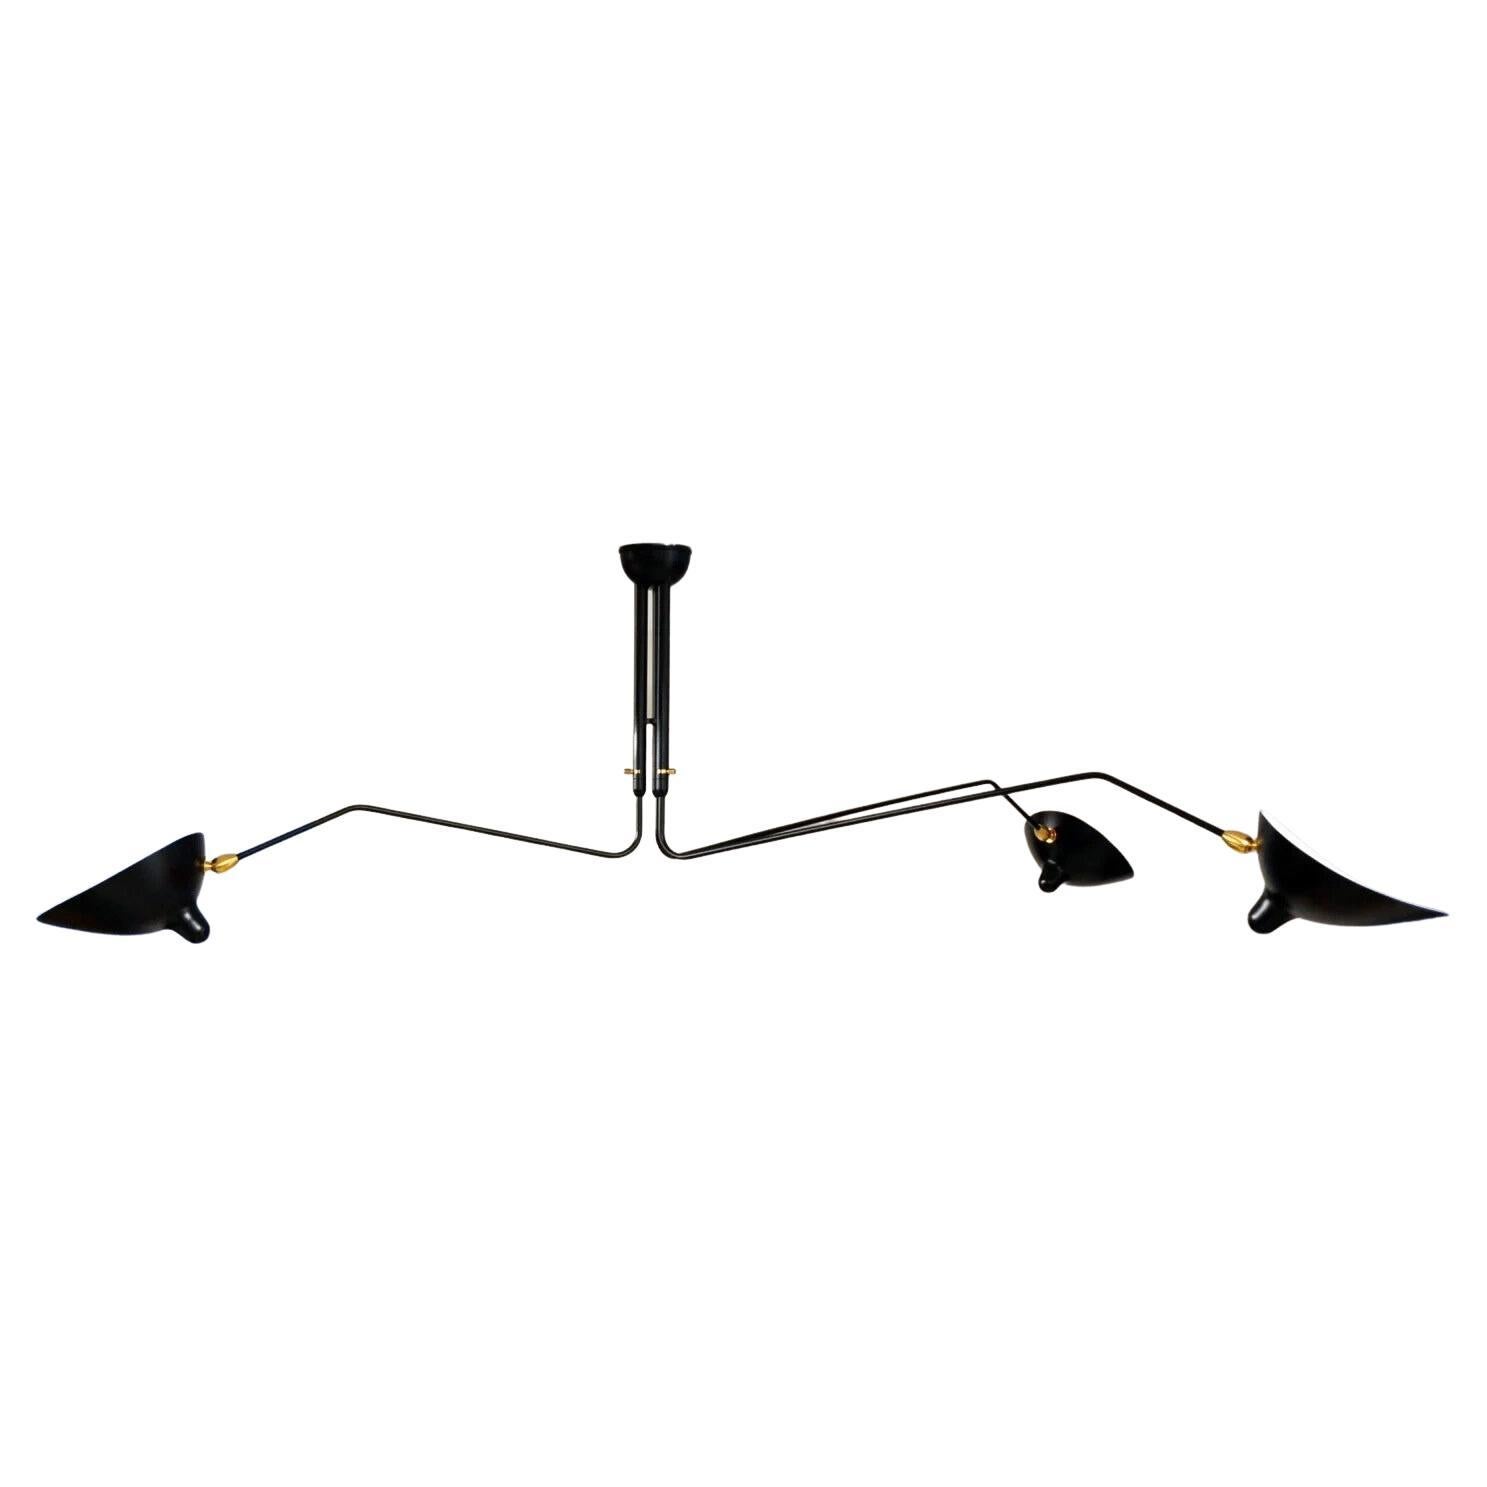 Serge Mouille - Ceiling Lamp with 3 Rotating Arms in Black - IN STOCK! For Sale